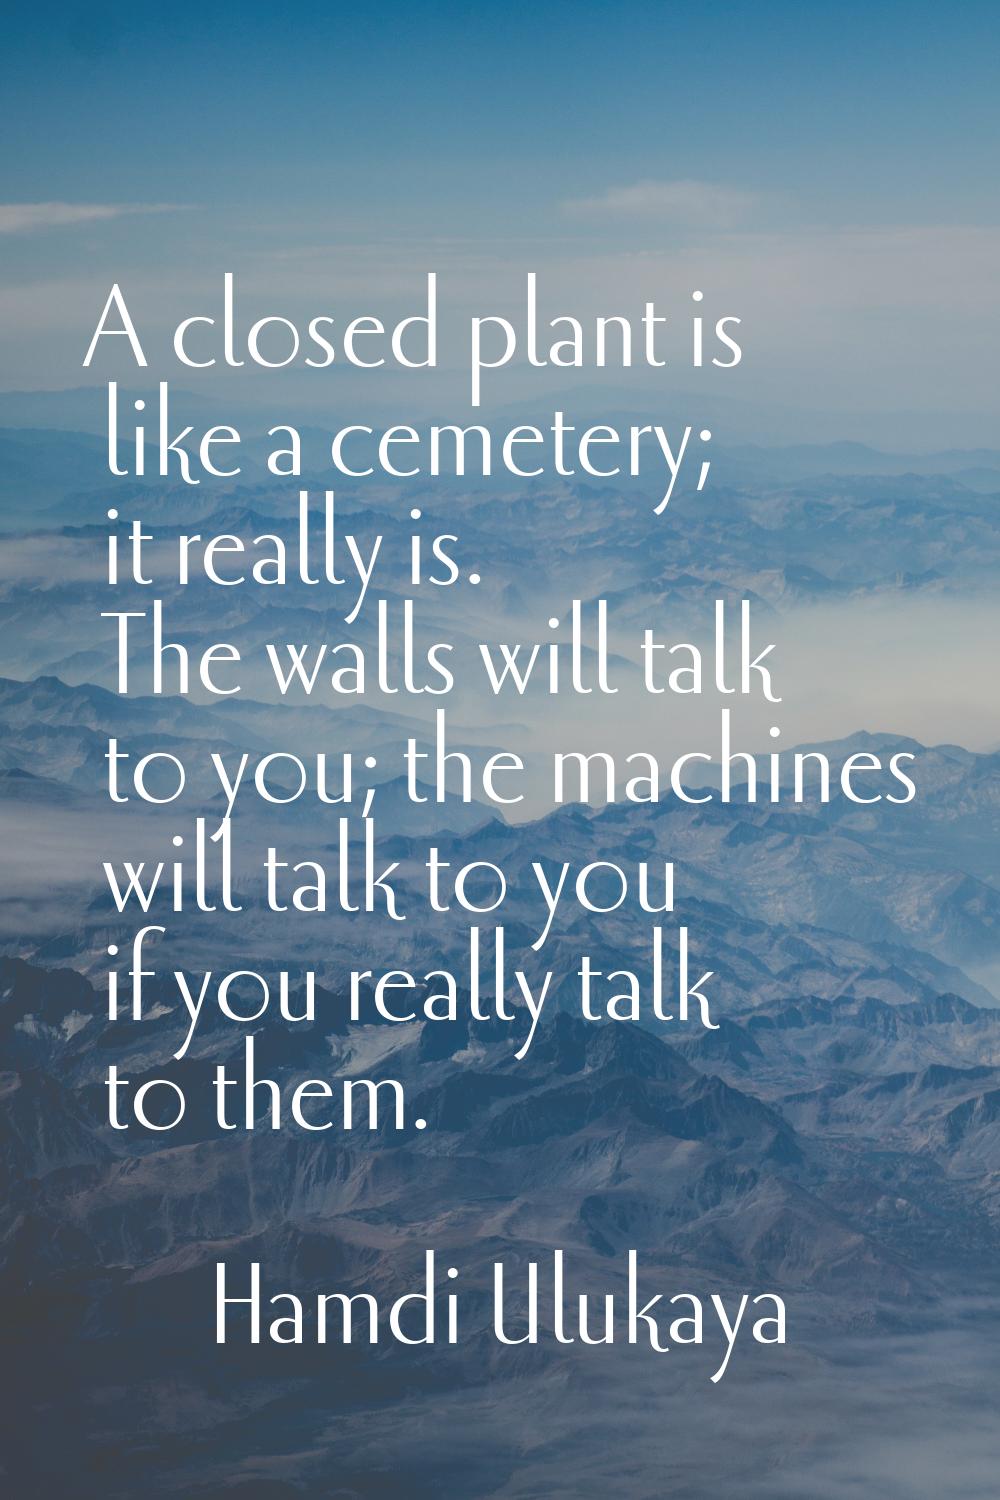 A closed plant is like a cemetery; it really is. The walls will talk to you; the machines will talk